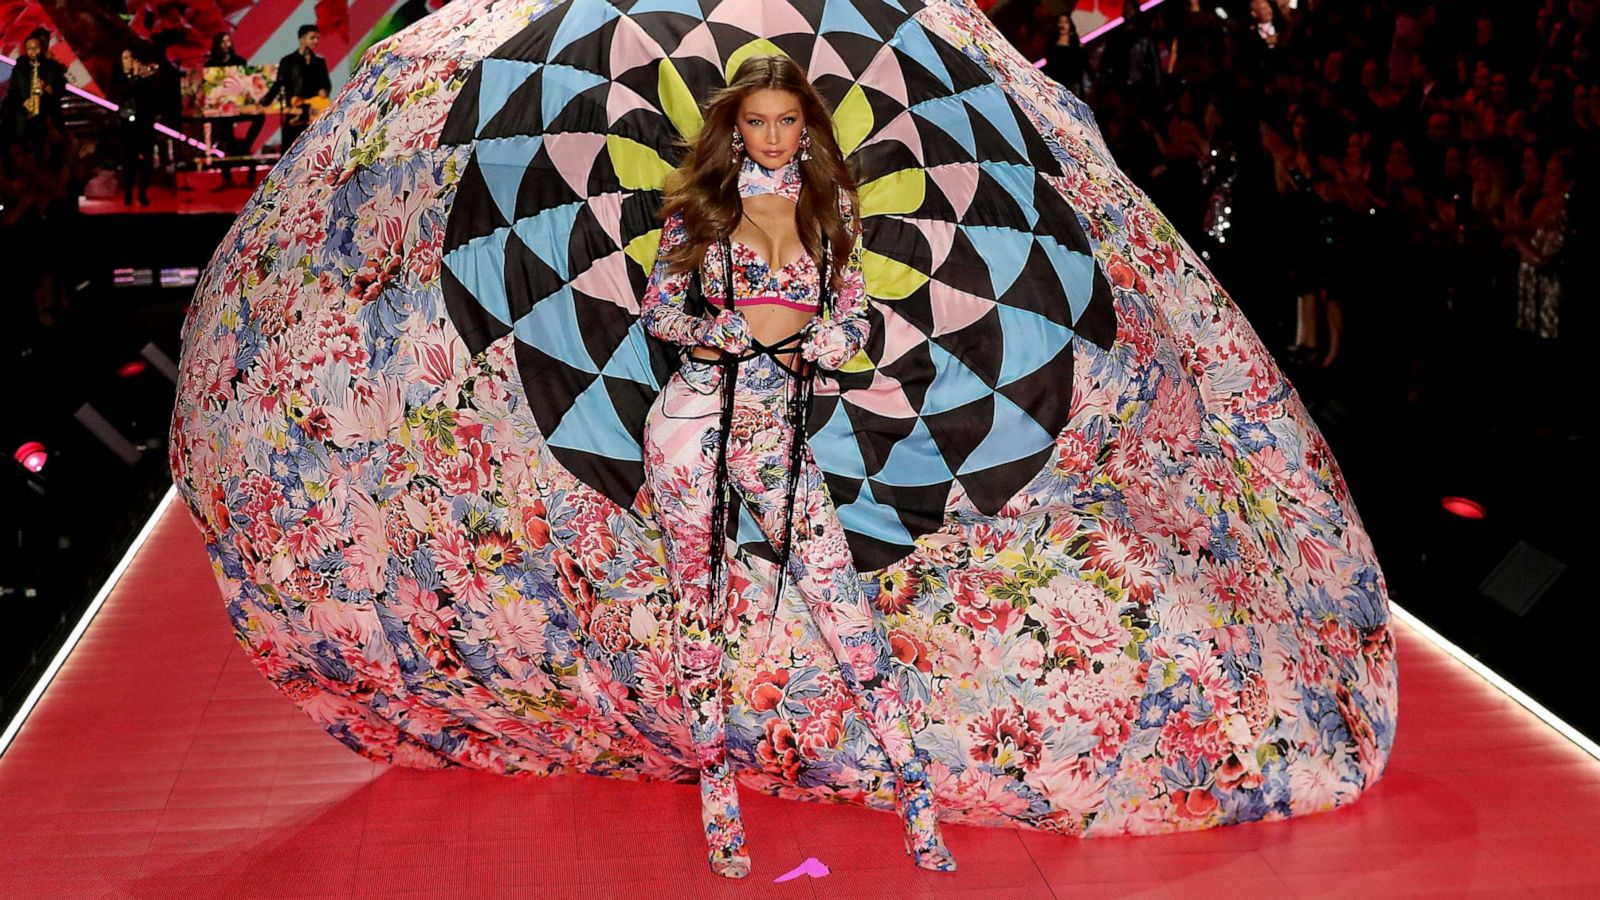 Victoria's Secret Fashion Show is Returning: Everything We Know